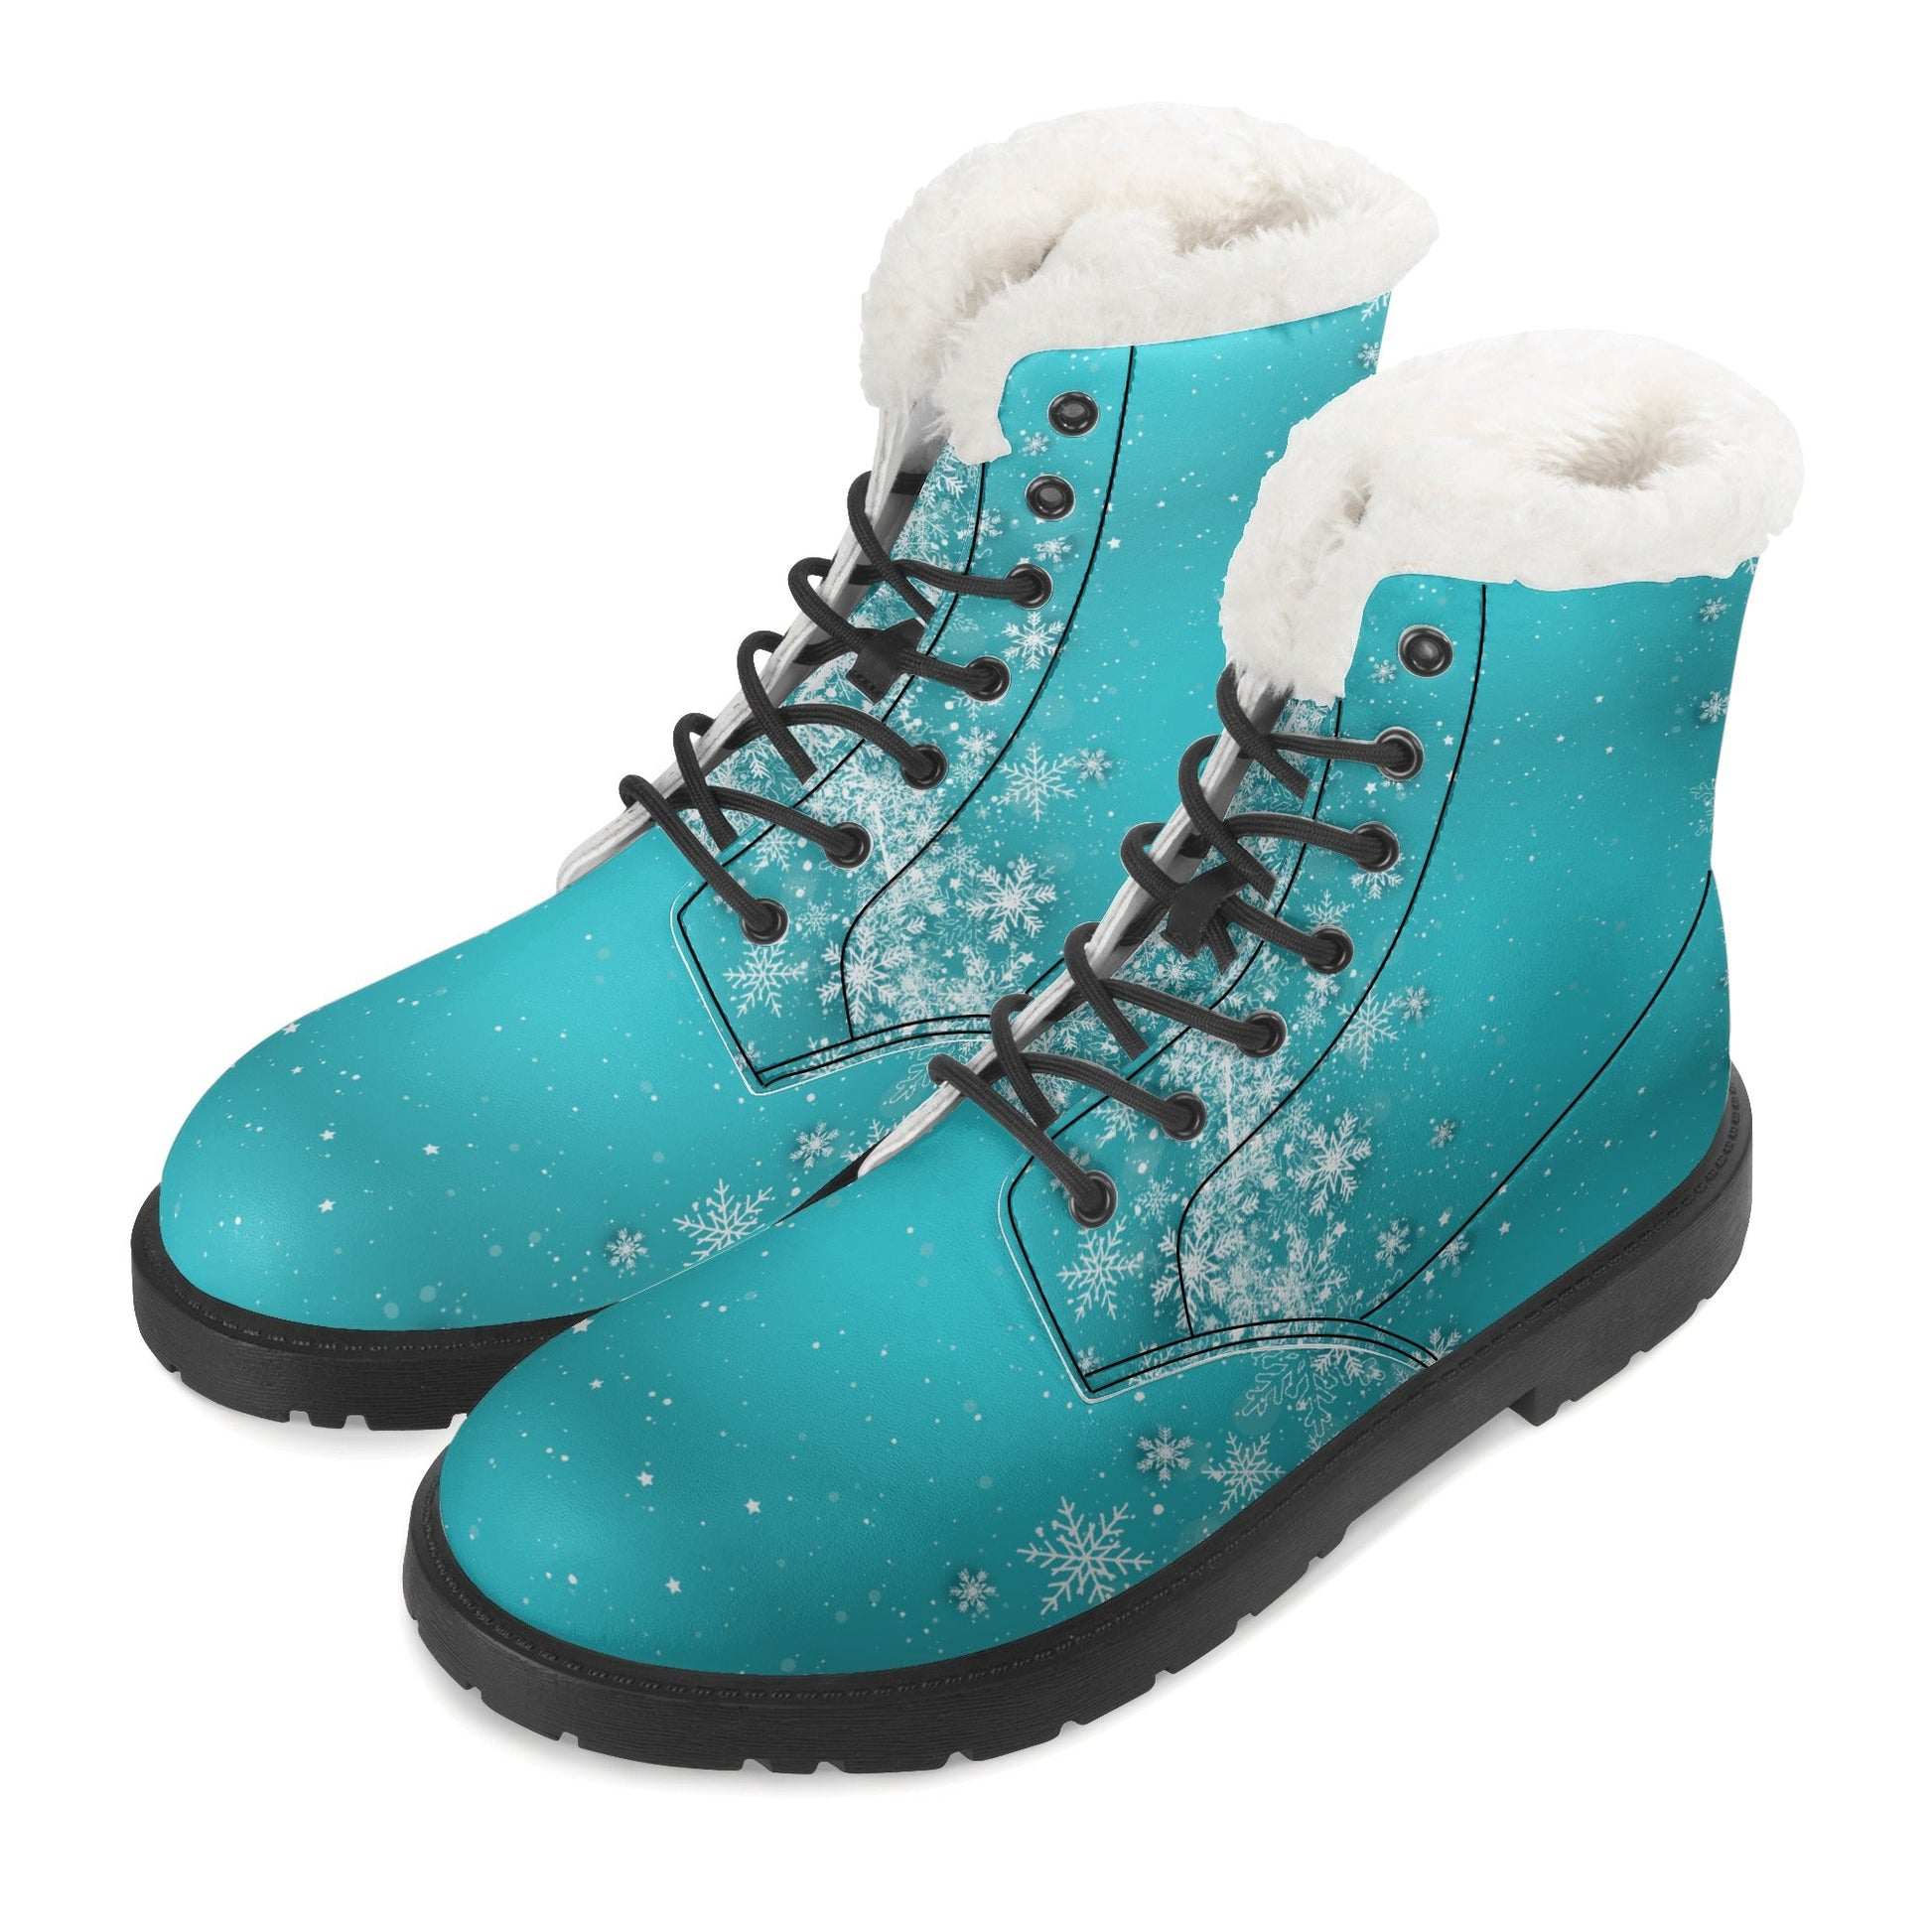 Stand out  with the  frost bite Womens Faux Fur Leather Boots  available at Hey Nugget. Grab yours today!